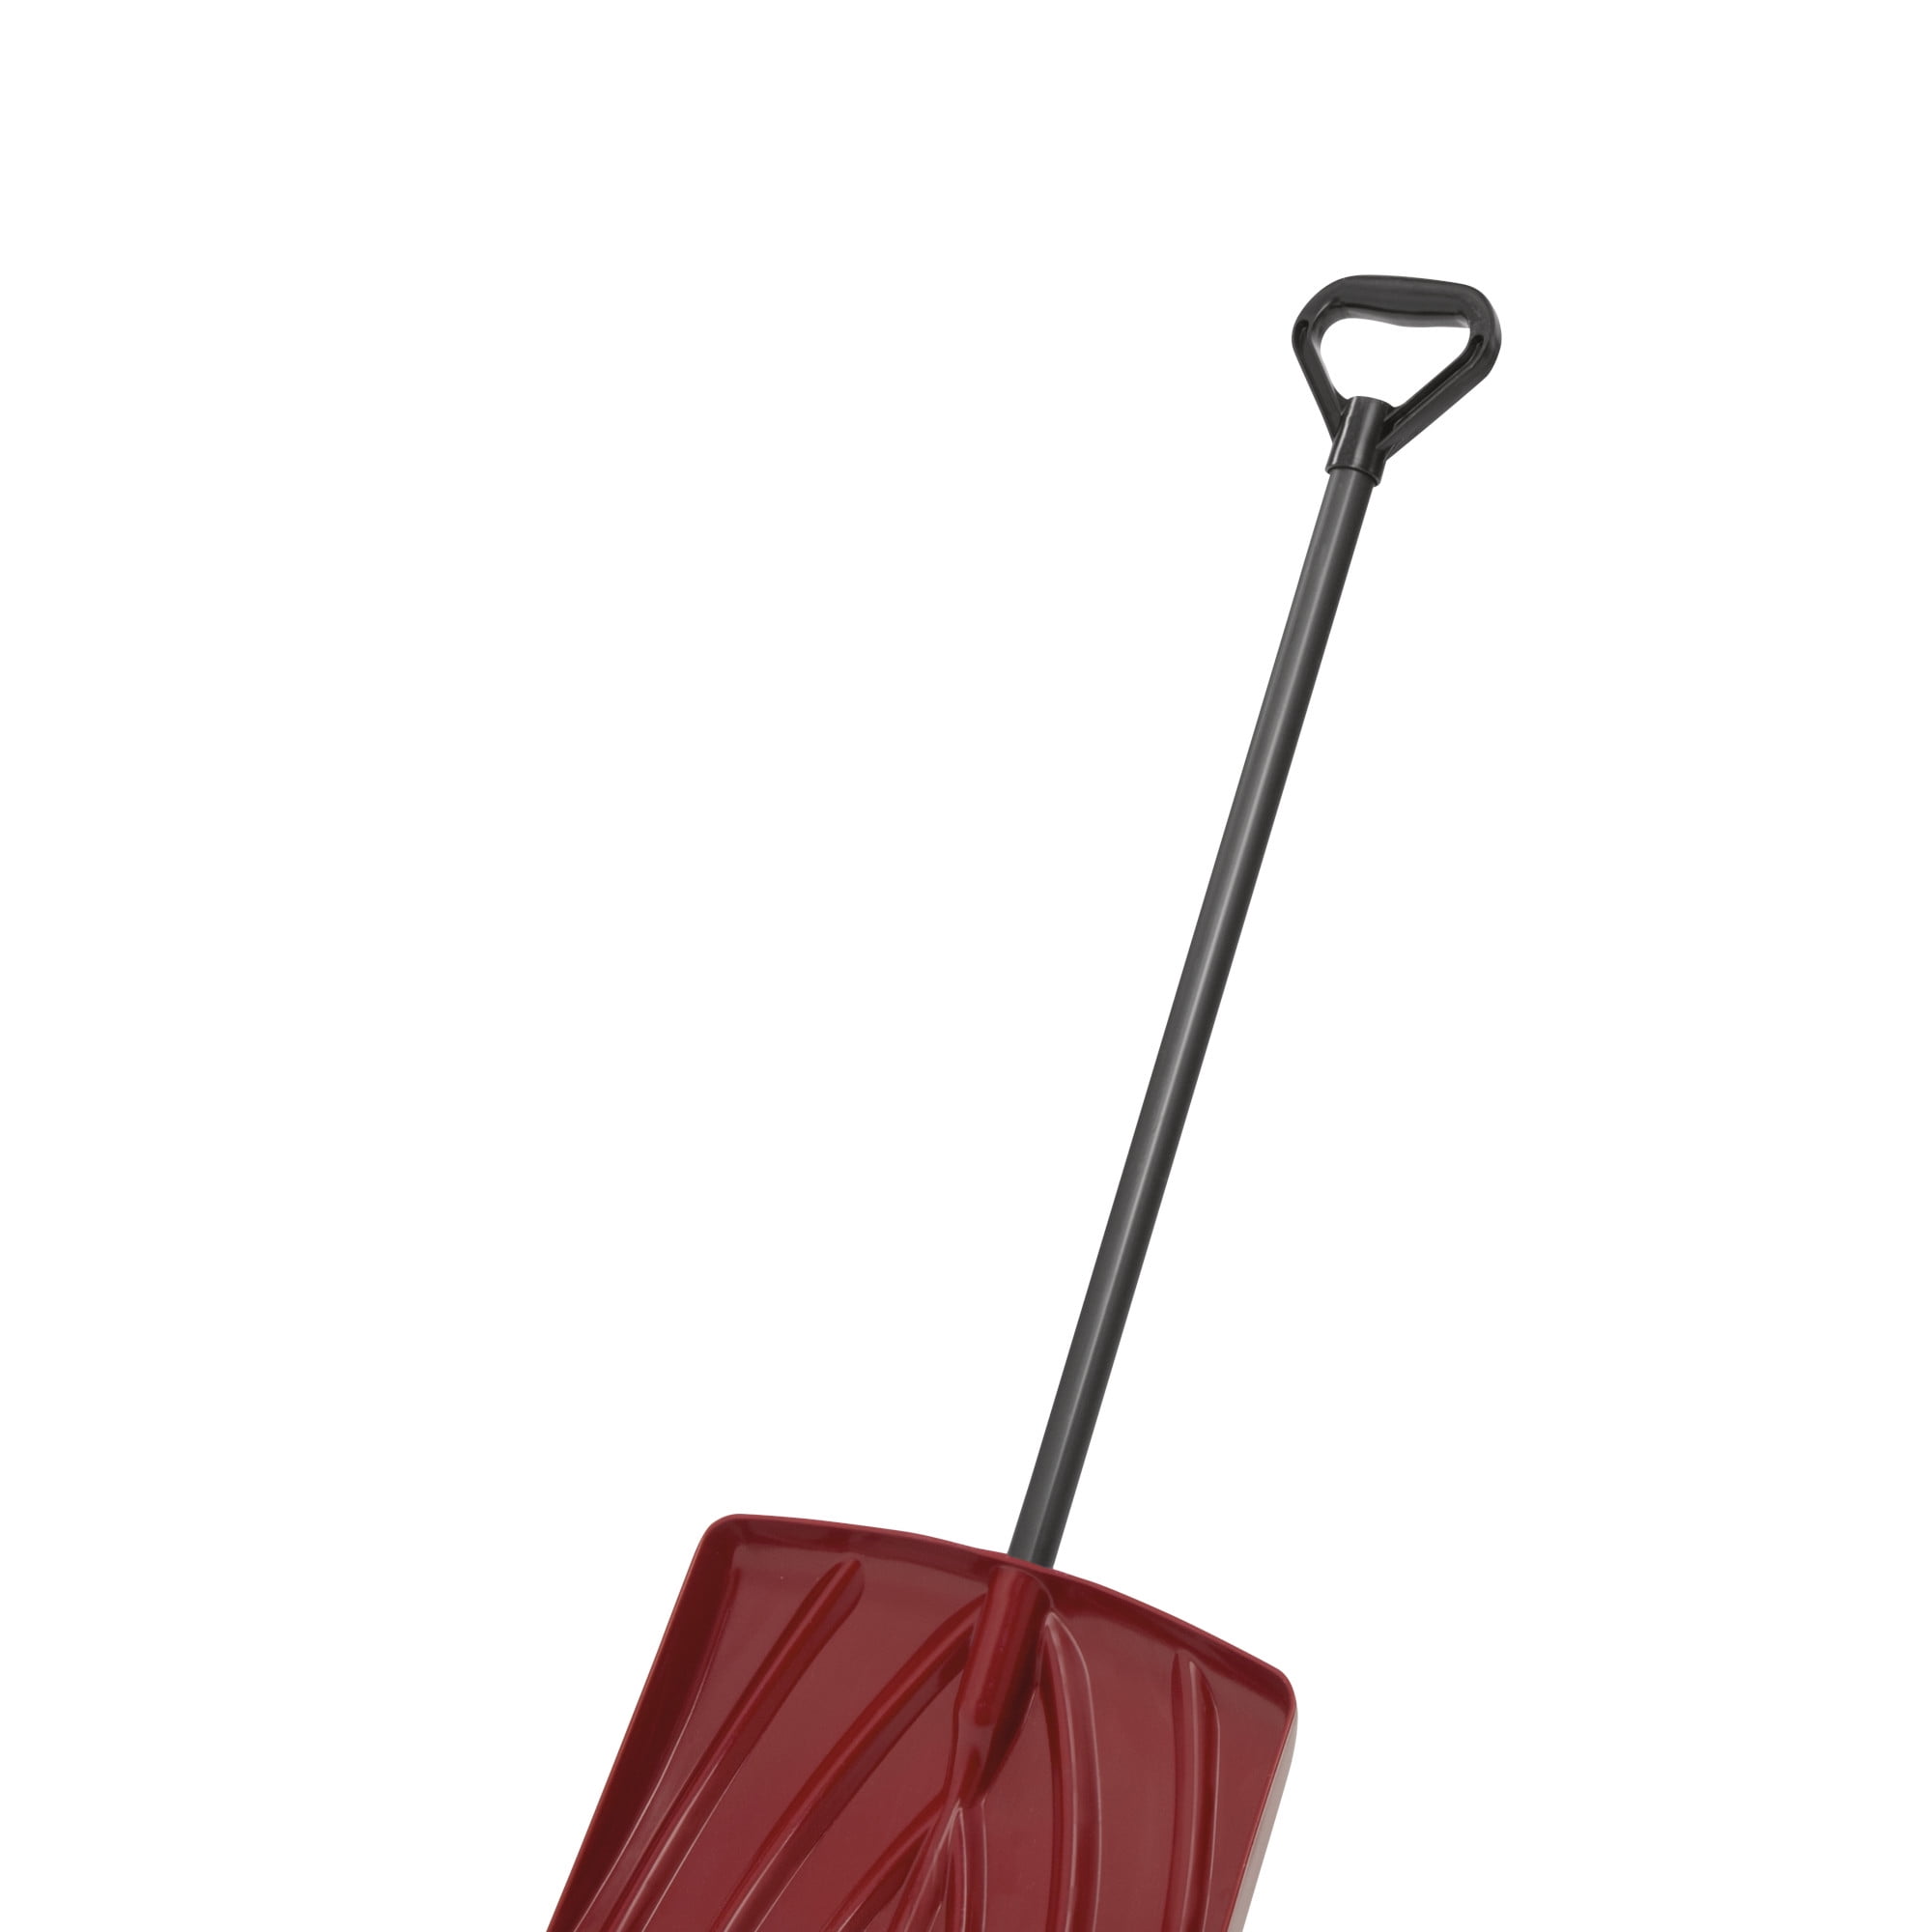 Perfect Sized Snow Shovel for Kids Age 3 to 12 Rocky Mountain Goods Kids Snow Shovel 1, Red Extra Strength Single Piece Plastic Bend Proof Design Safer Than Metal Snow Shovels 